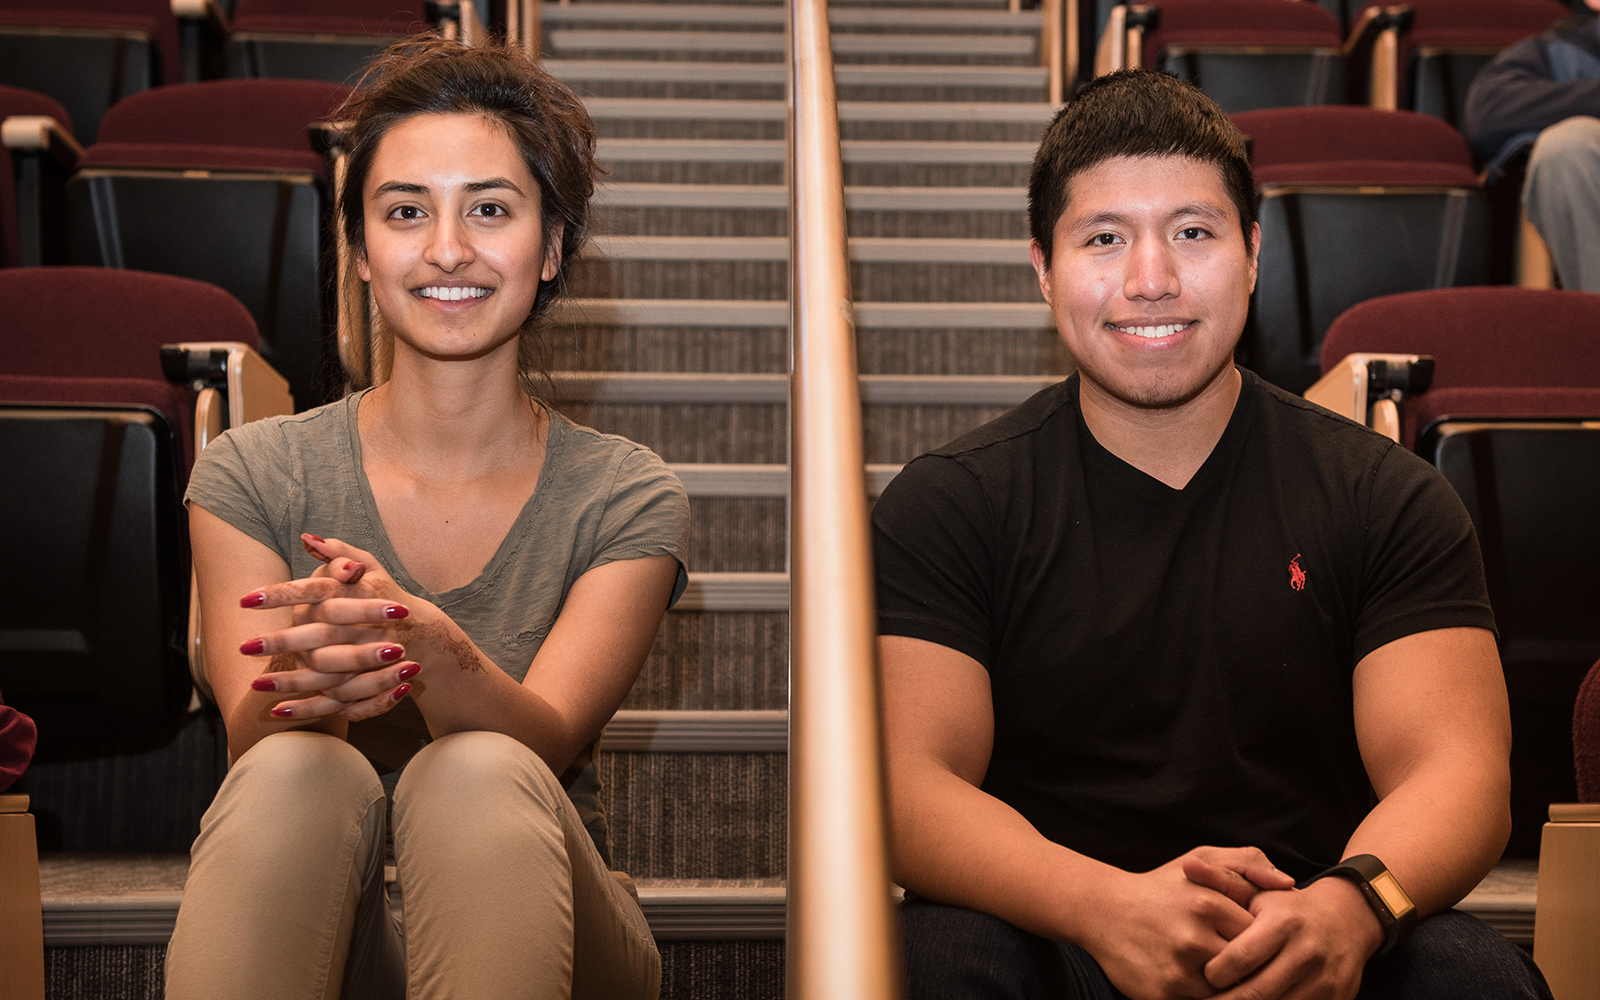 Shemona Singh and Ernesto Ortega are working on a platform that unites people over shared food tastes and common interests to build new friendships. (Devin Basdekian/UConn School of Business)